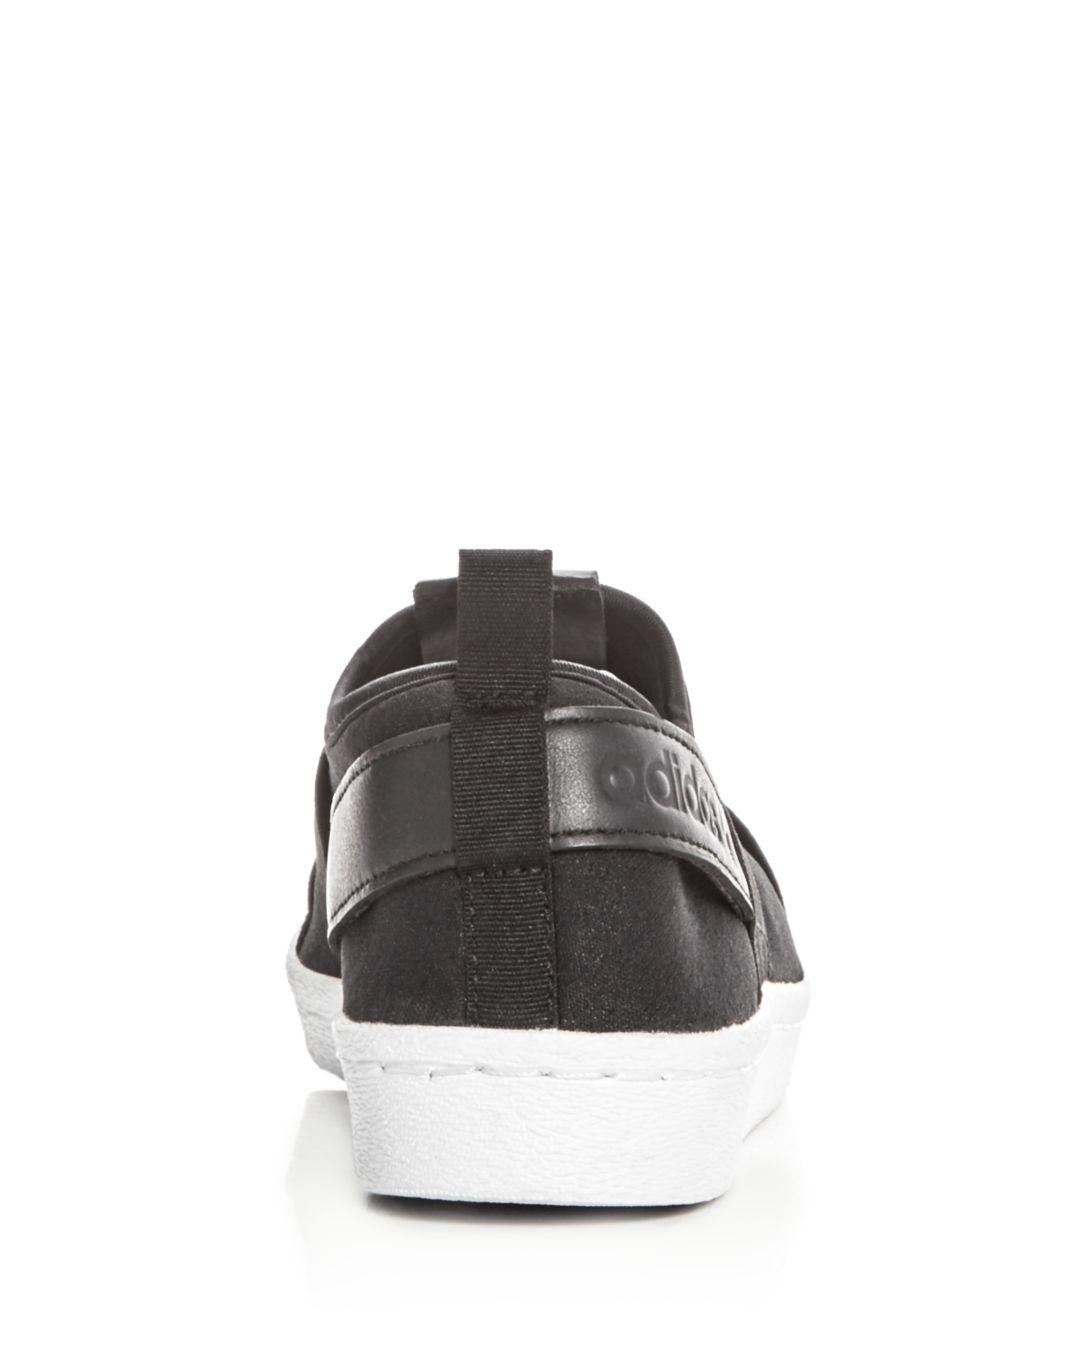 Lily Udgående Picasso adidas Women's Superstar Slip - On Sneakers in Black | Lyst